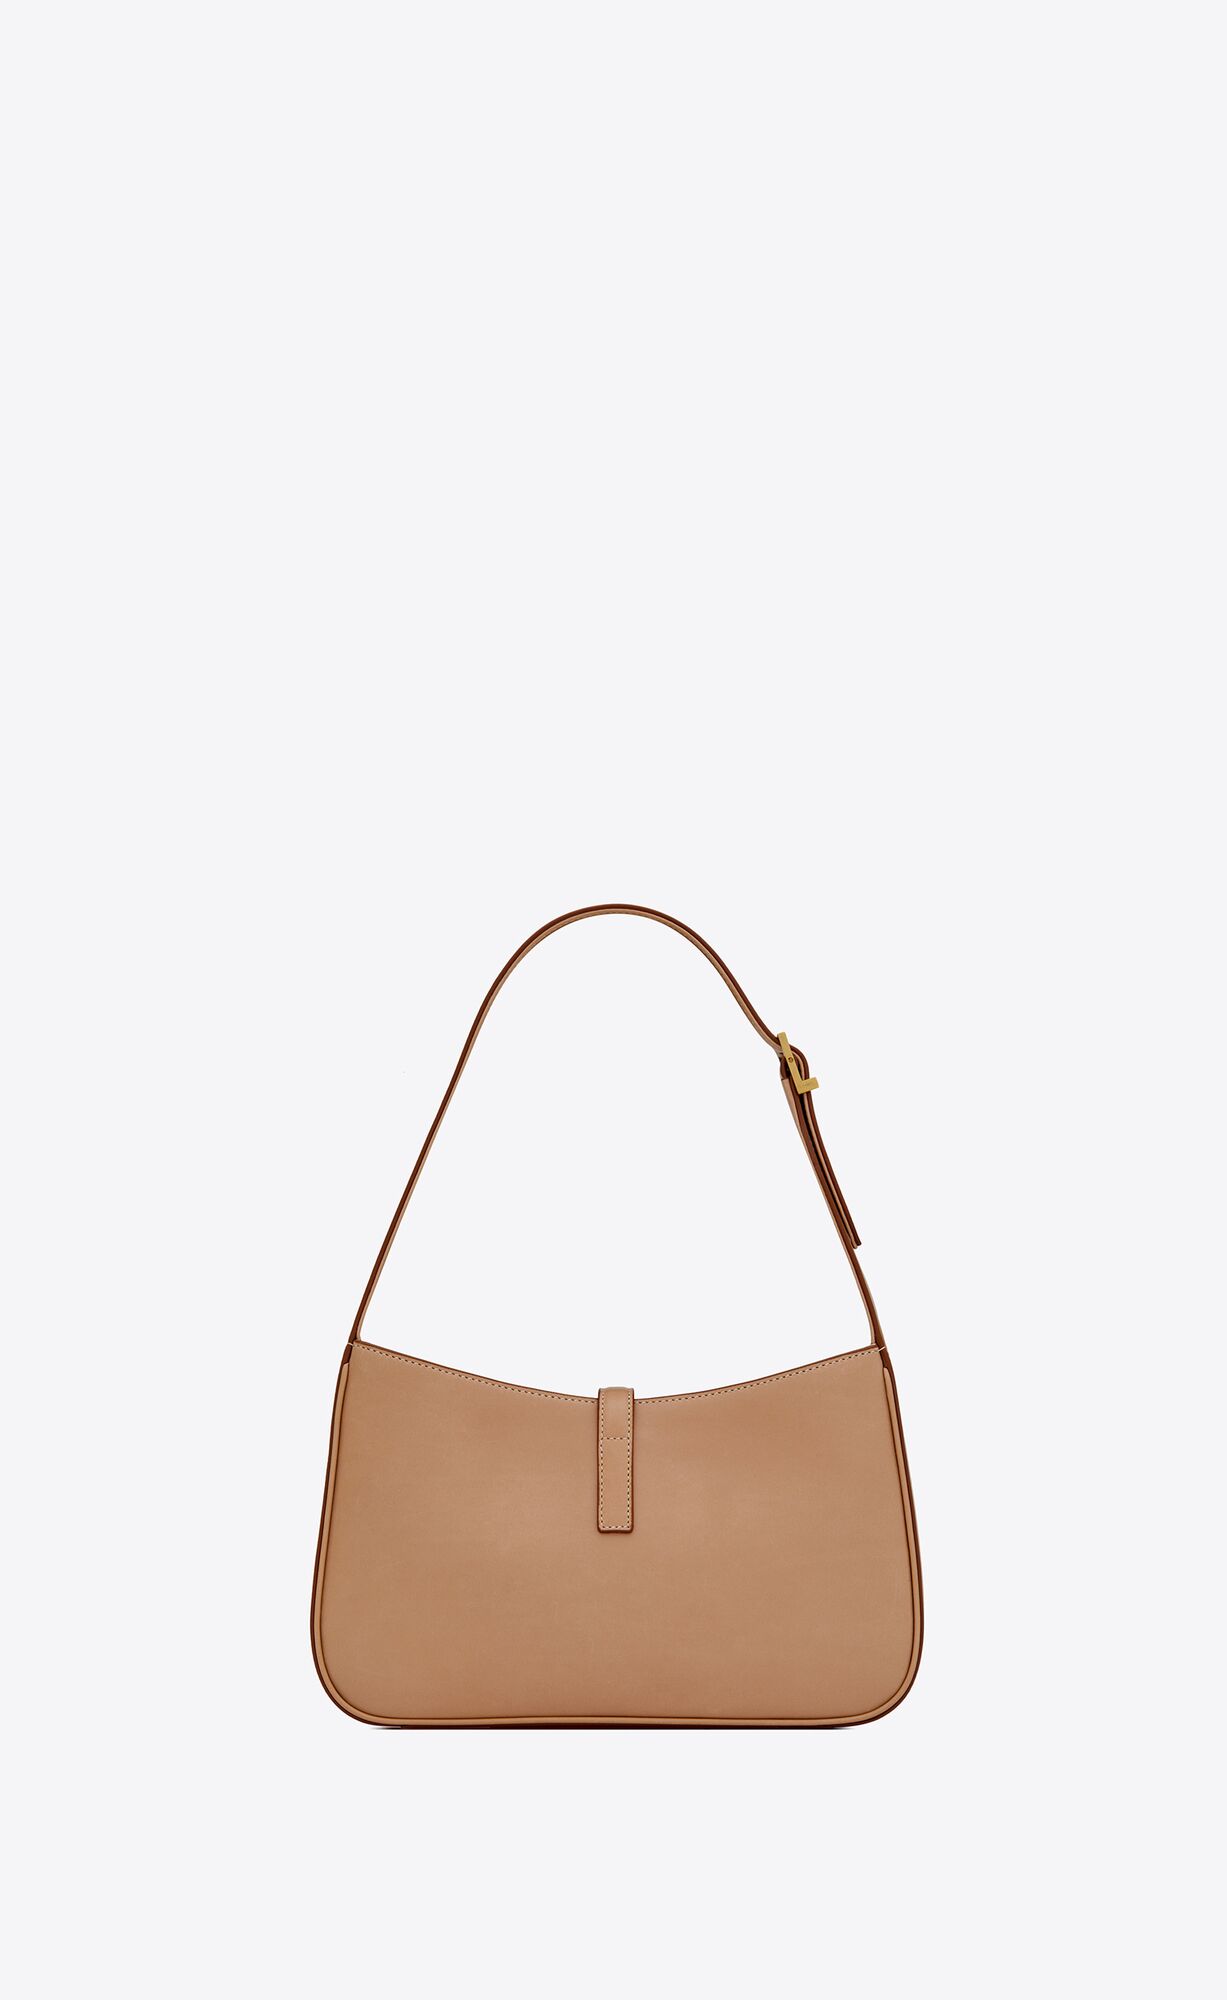 LE 5 À 7 HOBO BAG IN SMOOTH LEATHER | Saint Laurent | YSL.com